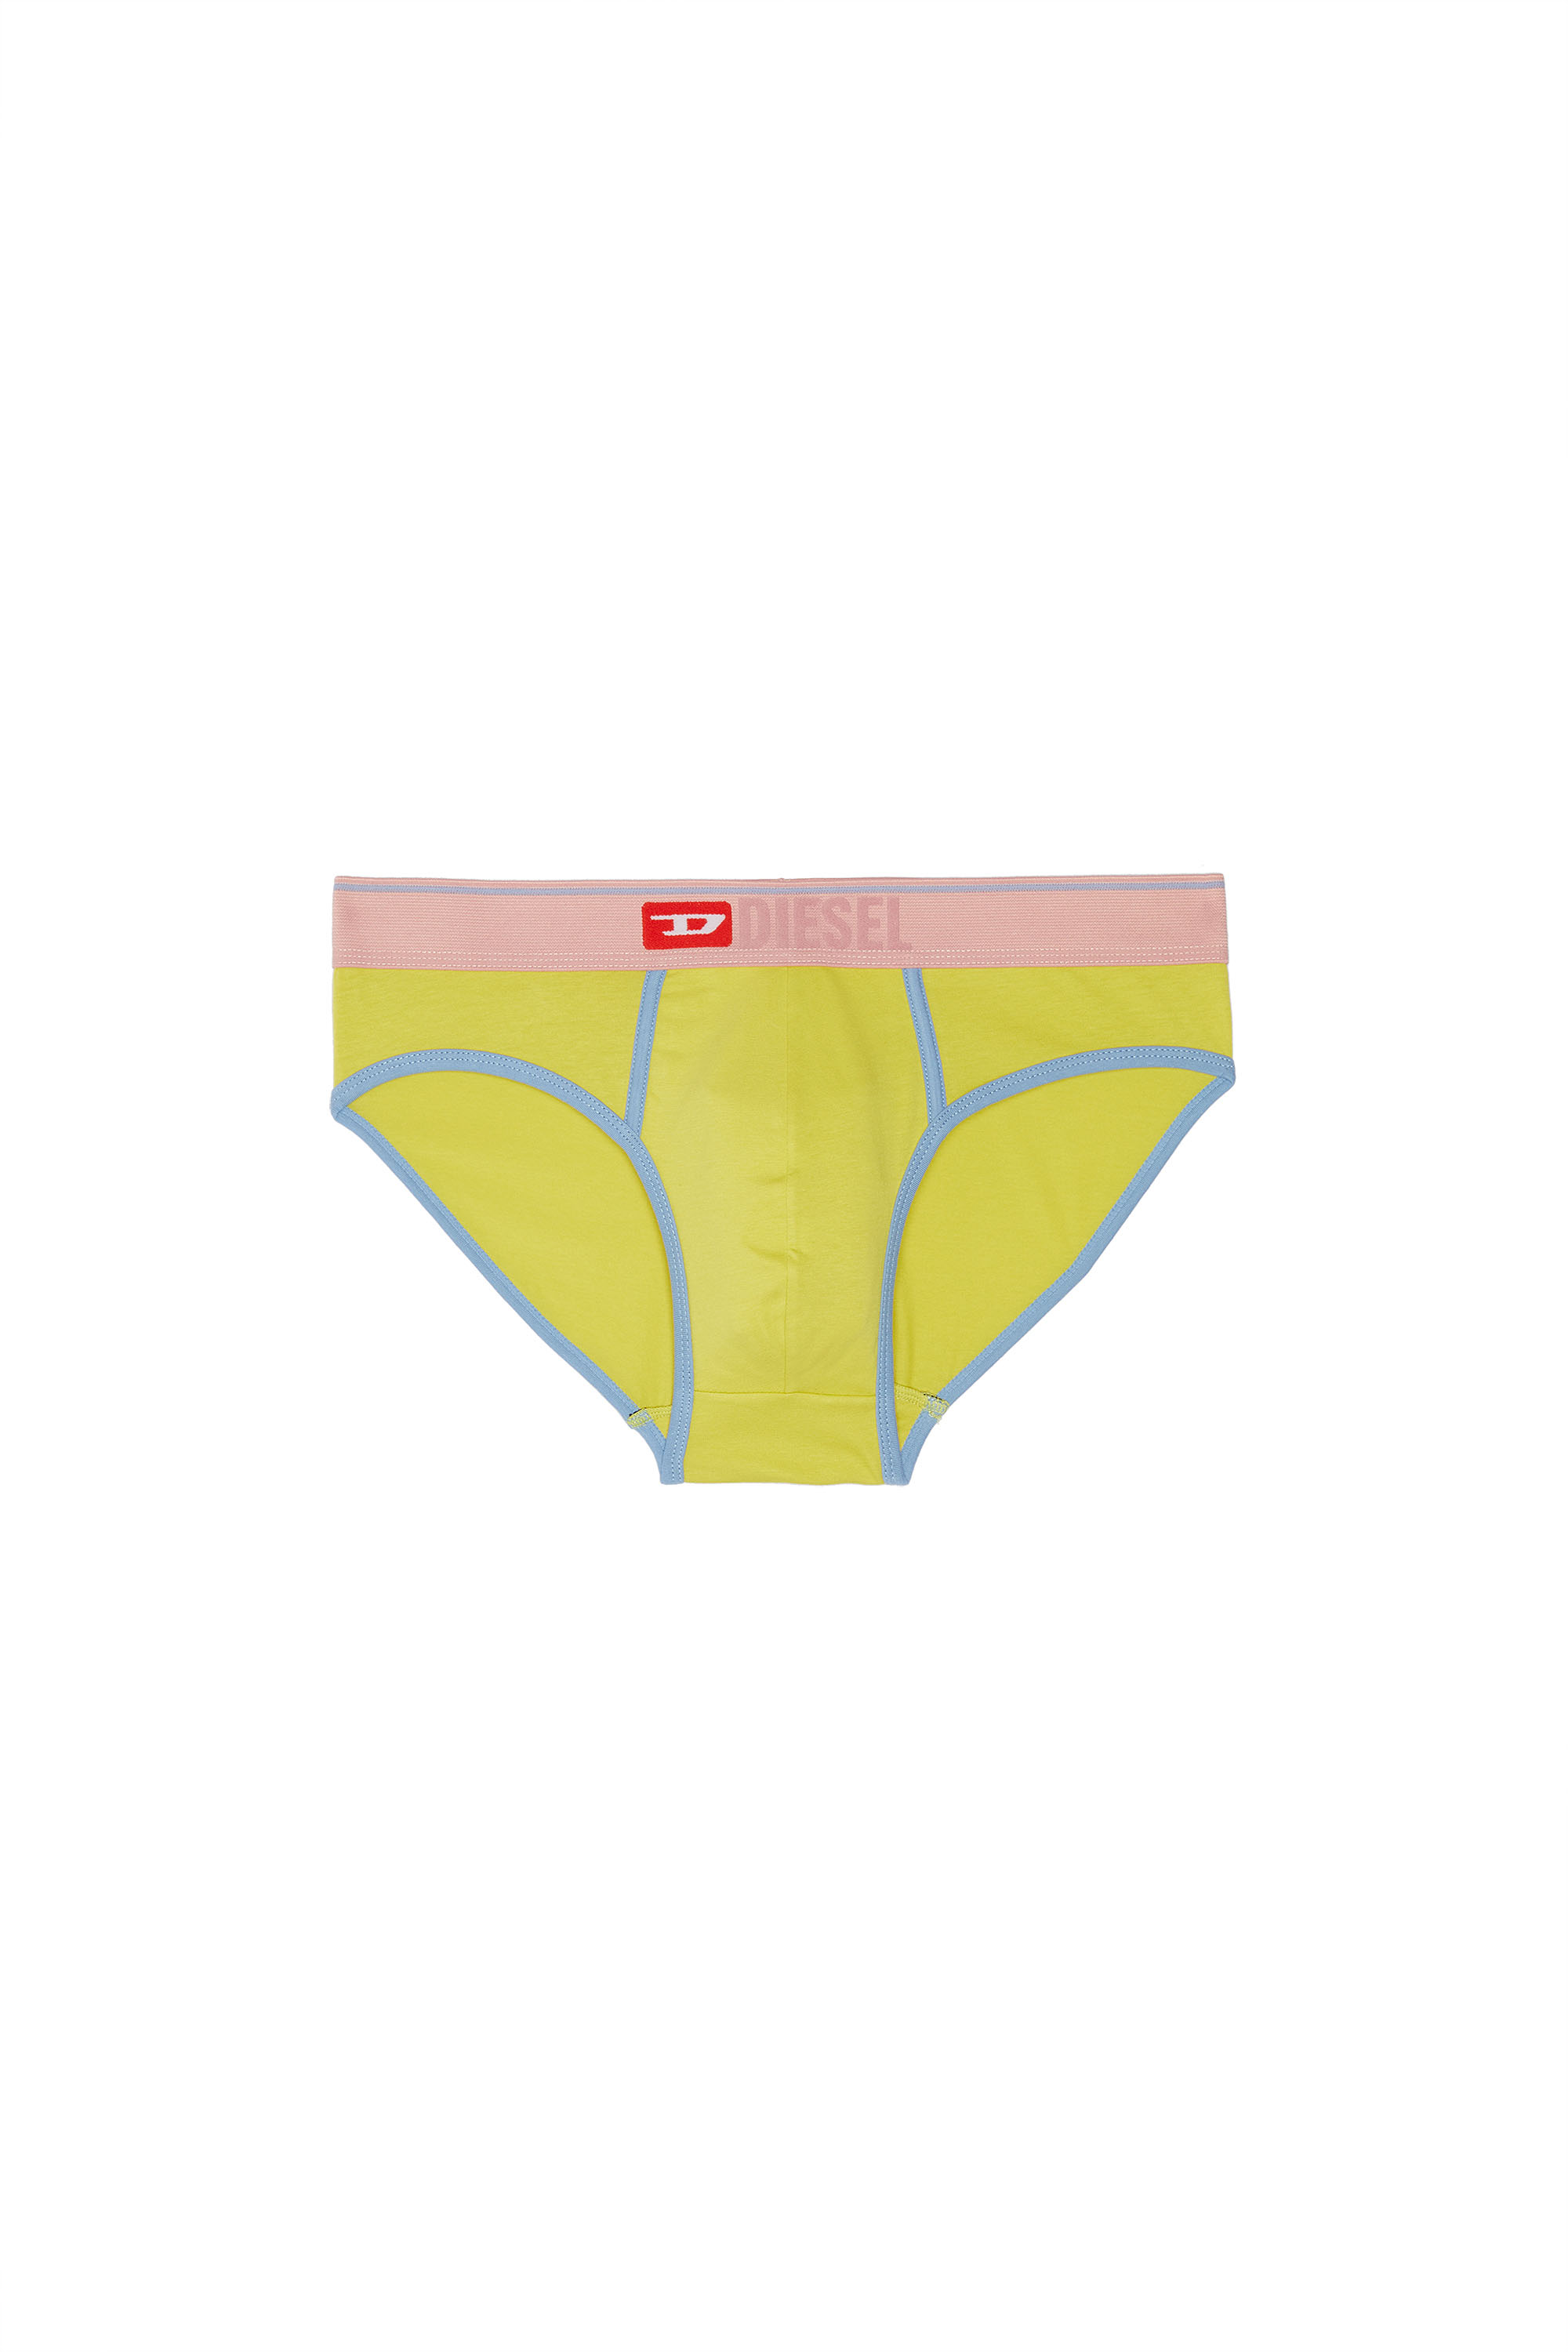 Diesel - UMBR-ANDRE, Yellow - Image 1